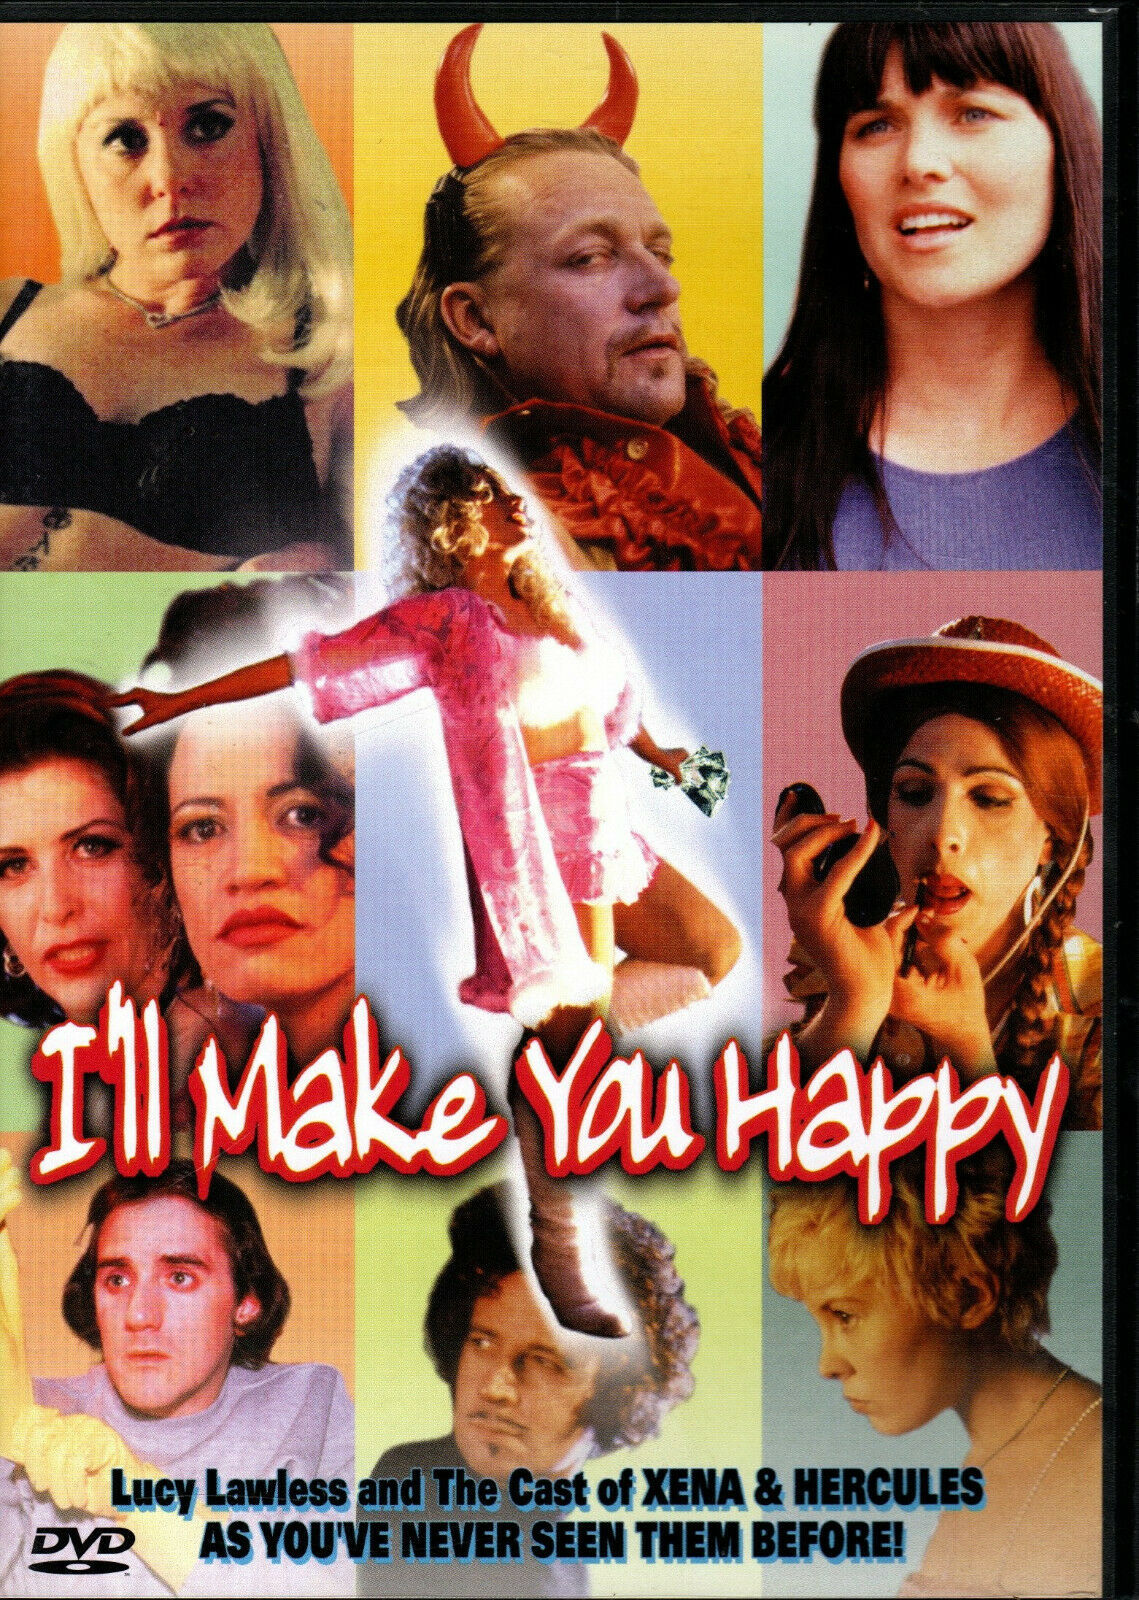 I'll Make You Happy - DVD starring Lucy Lawless, Jodie Rimmer - DVDs ...